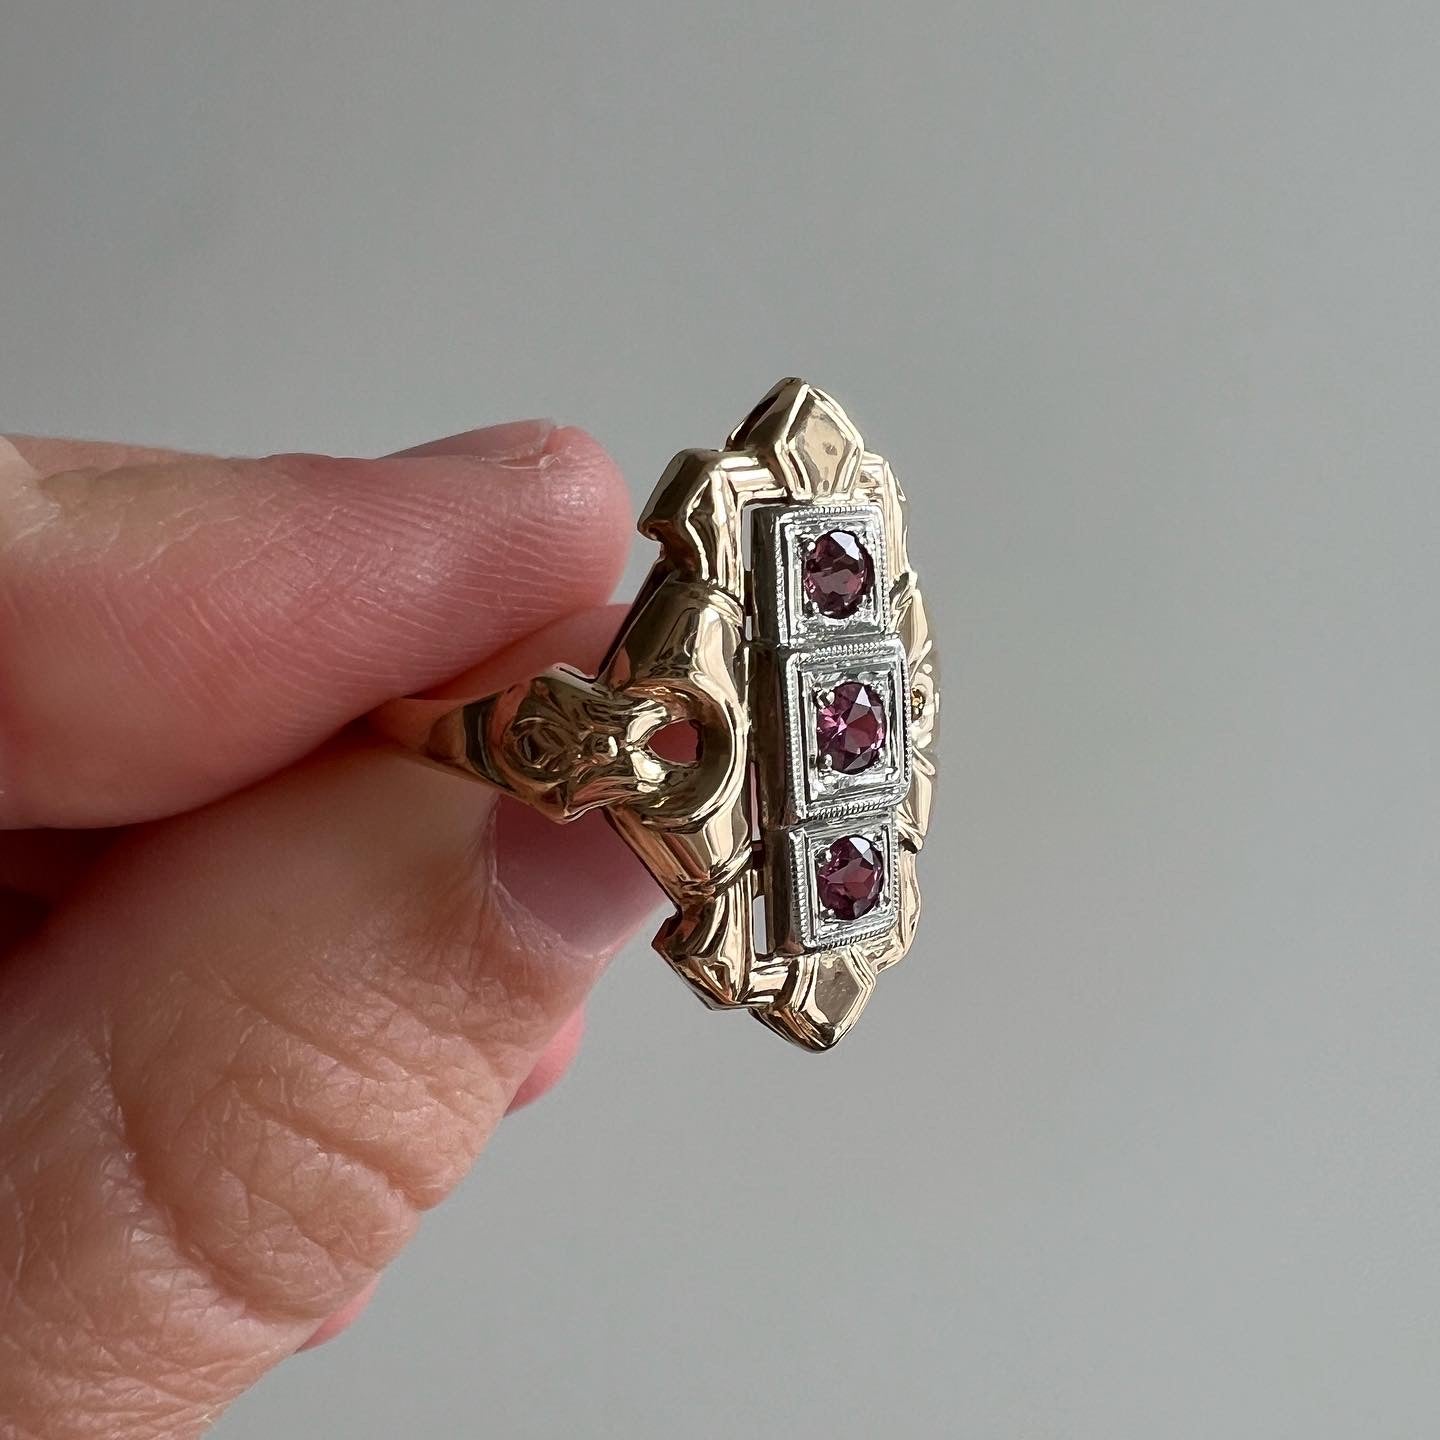 reimagined V I N T A G E // rhodolite dress up / 10k yellow and white gold with pink rhodolite garnets / 1940s does 1920s art deco / size 7